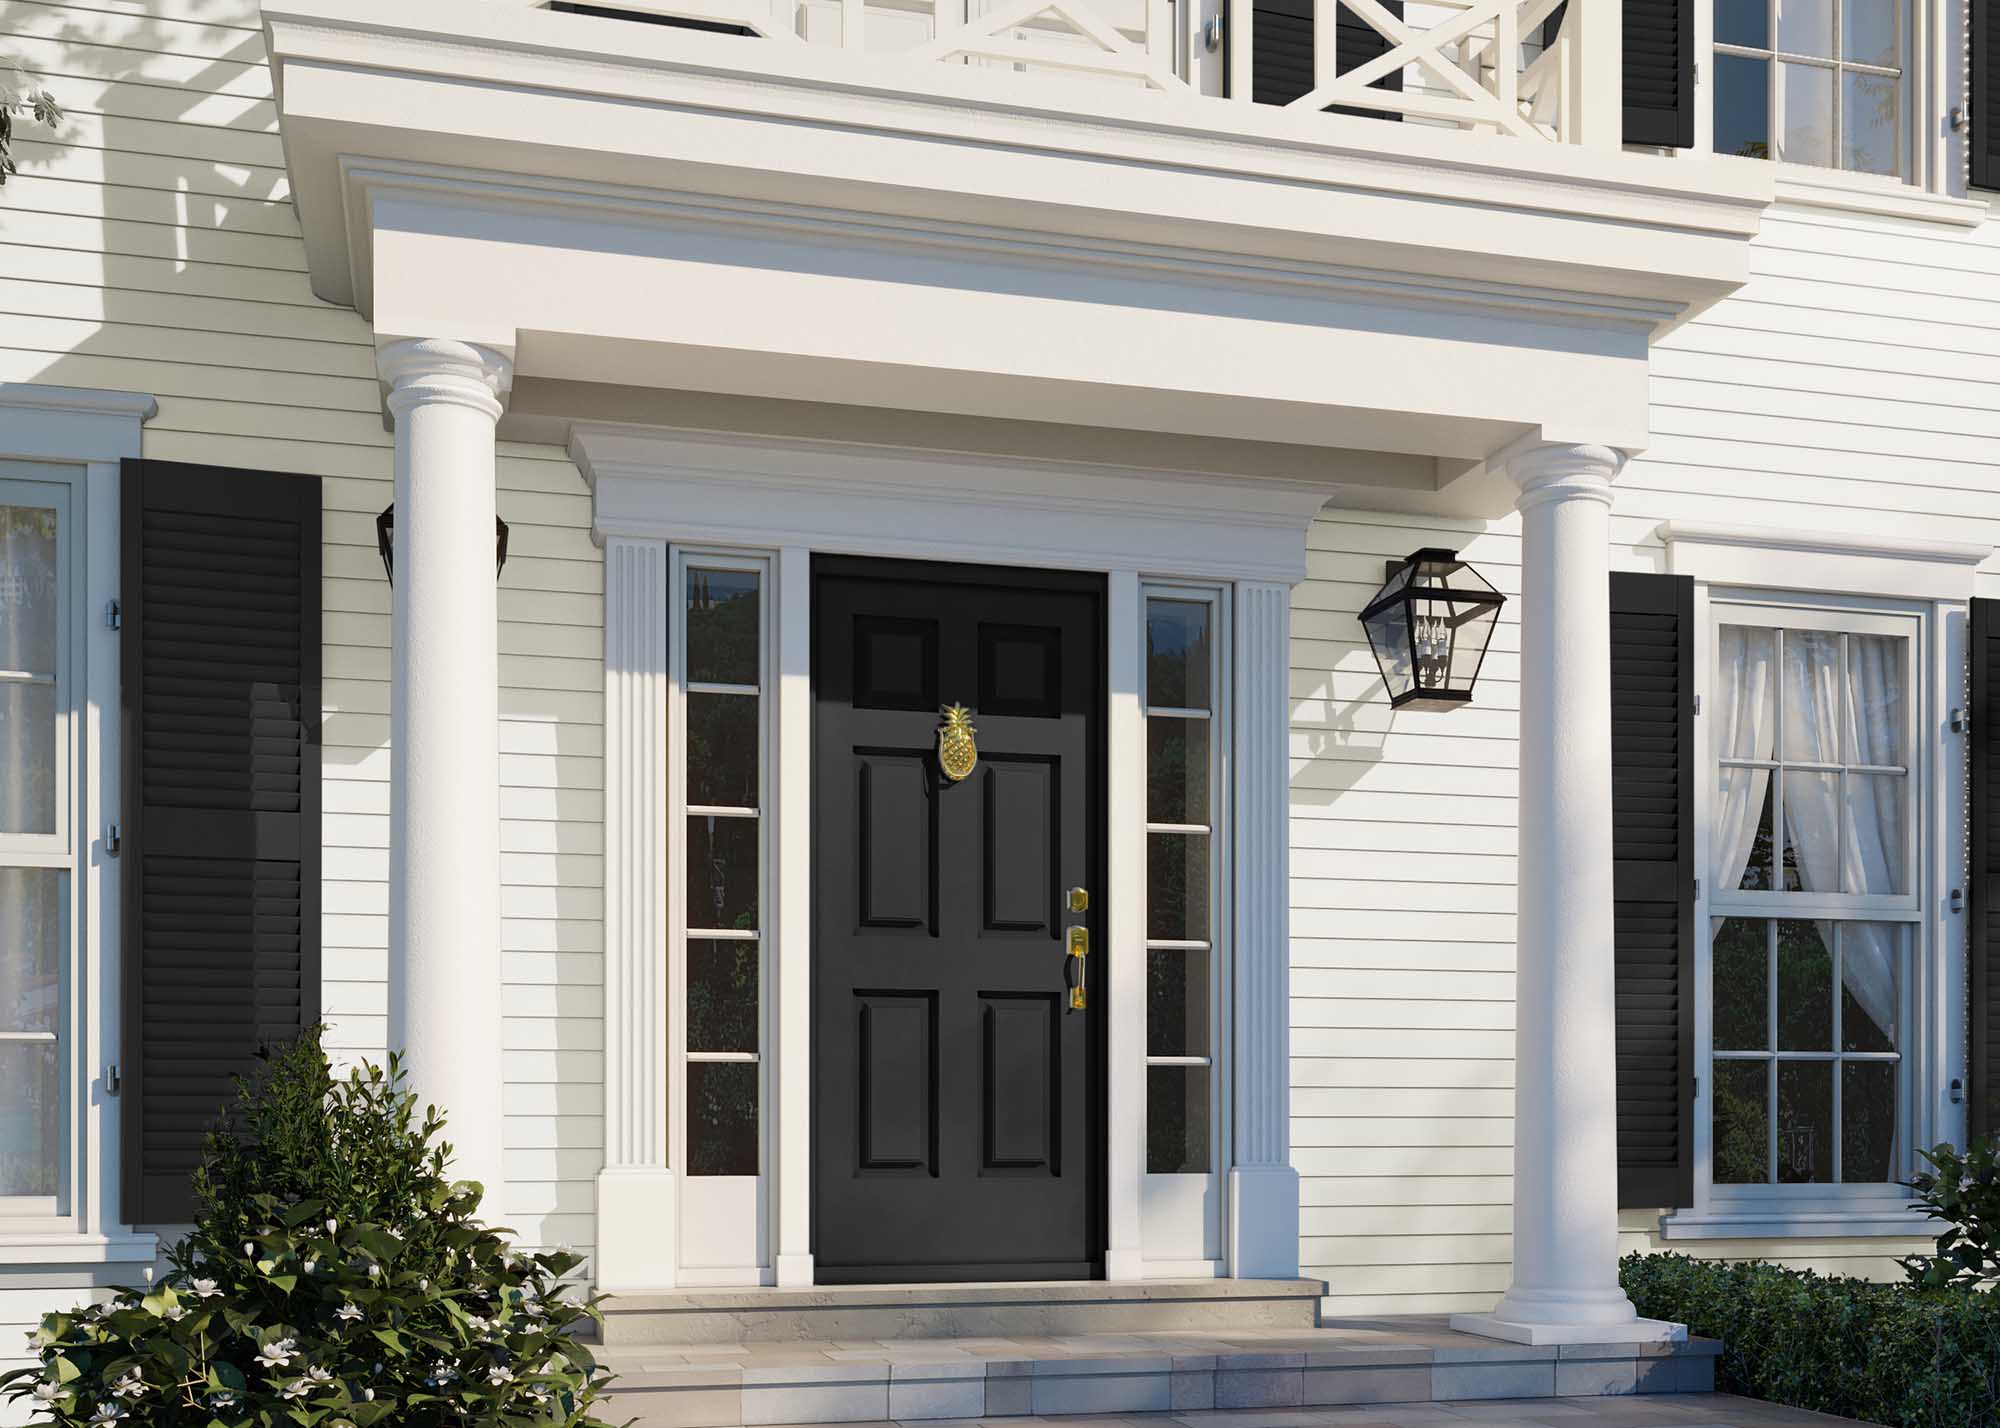 Looking for front door paint colors? Try out Clare’s Exterior Paint in Blackish, it brings the perfect contrast to any home’s facade. 